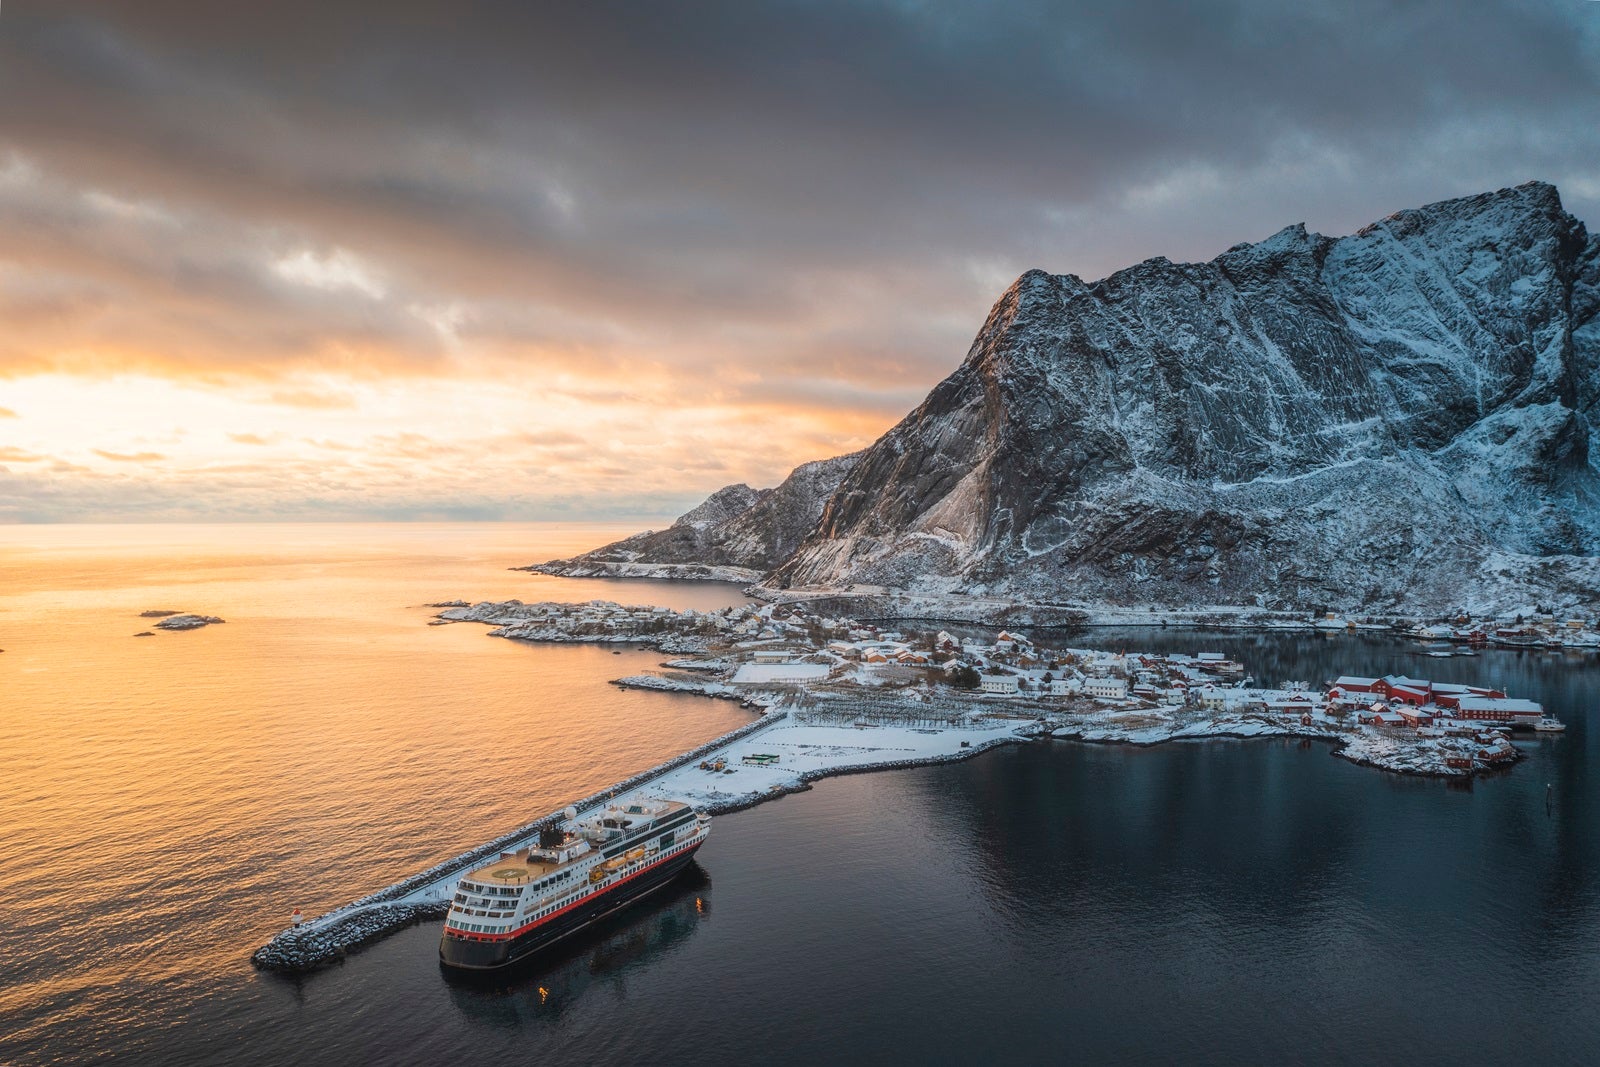 A cruise ship docked in the Lofoten Islands in the Arctic